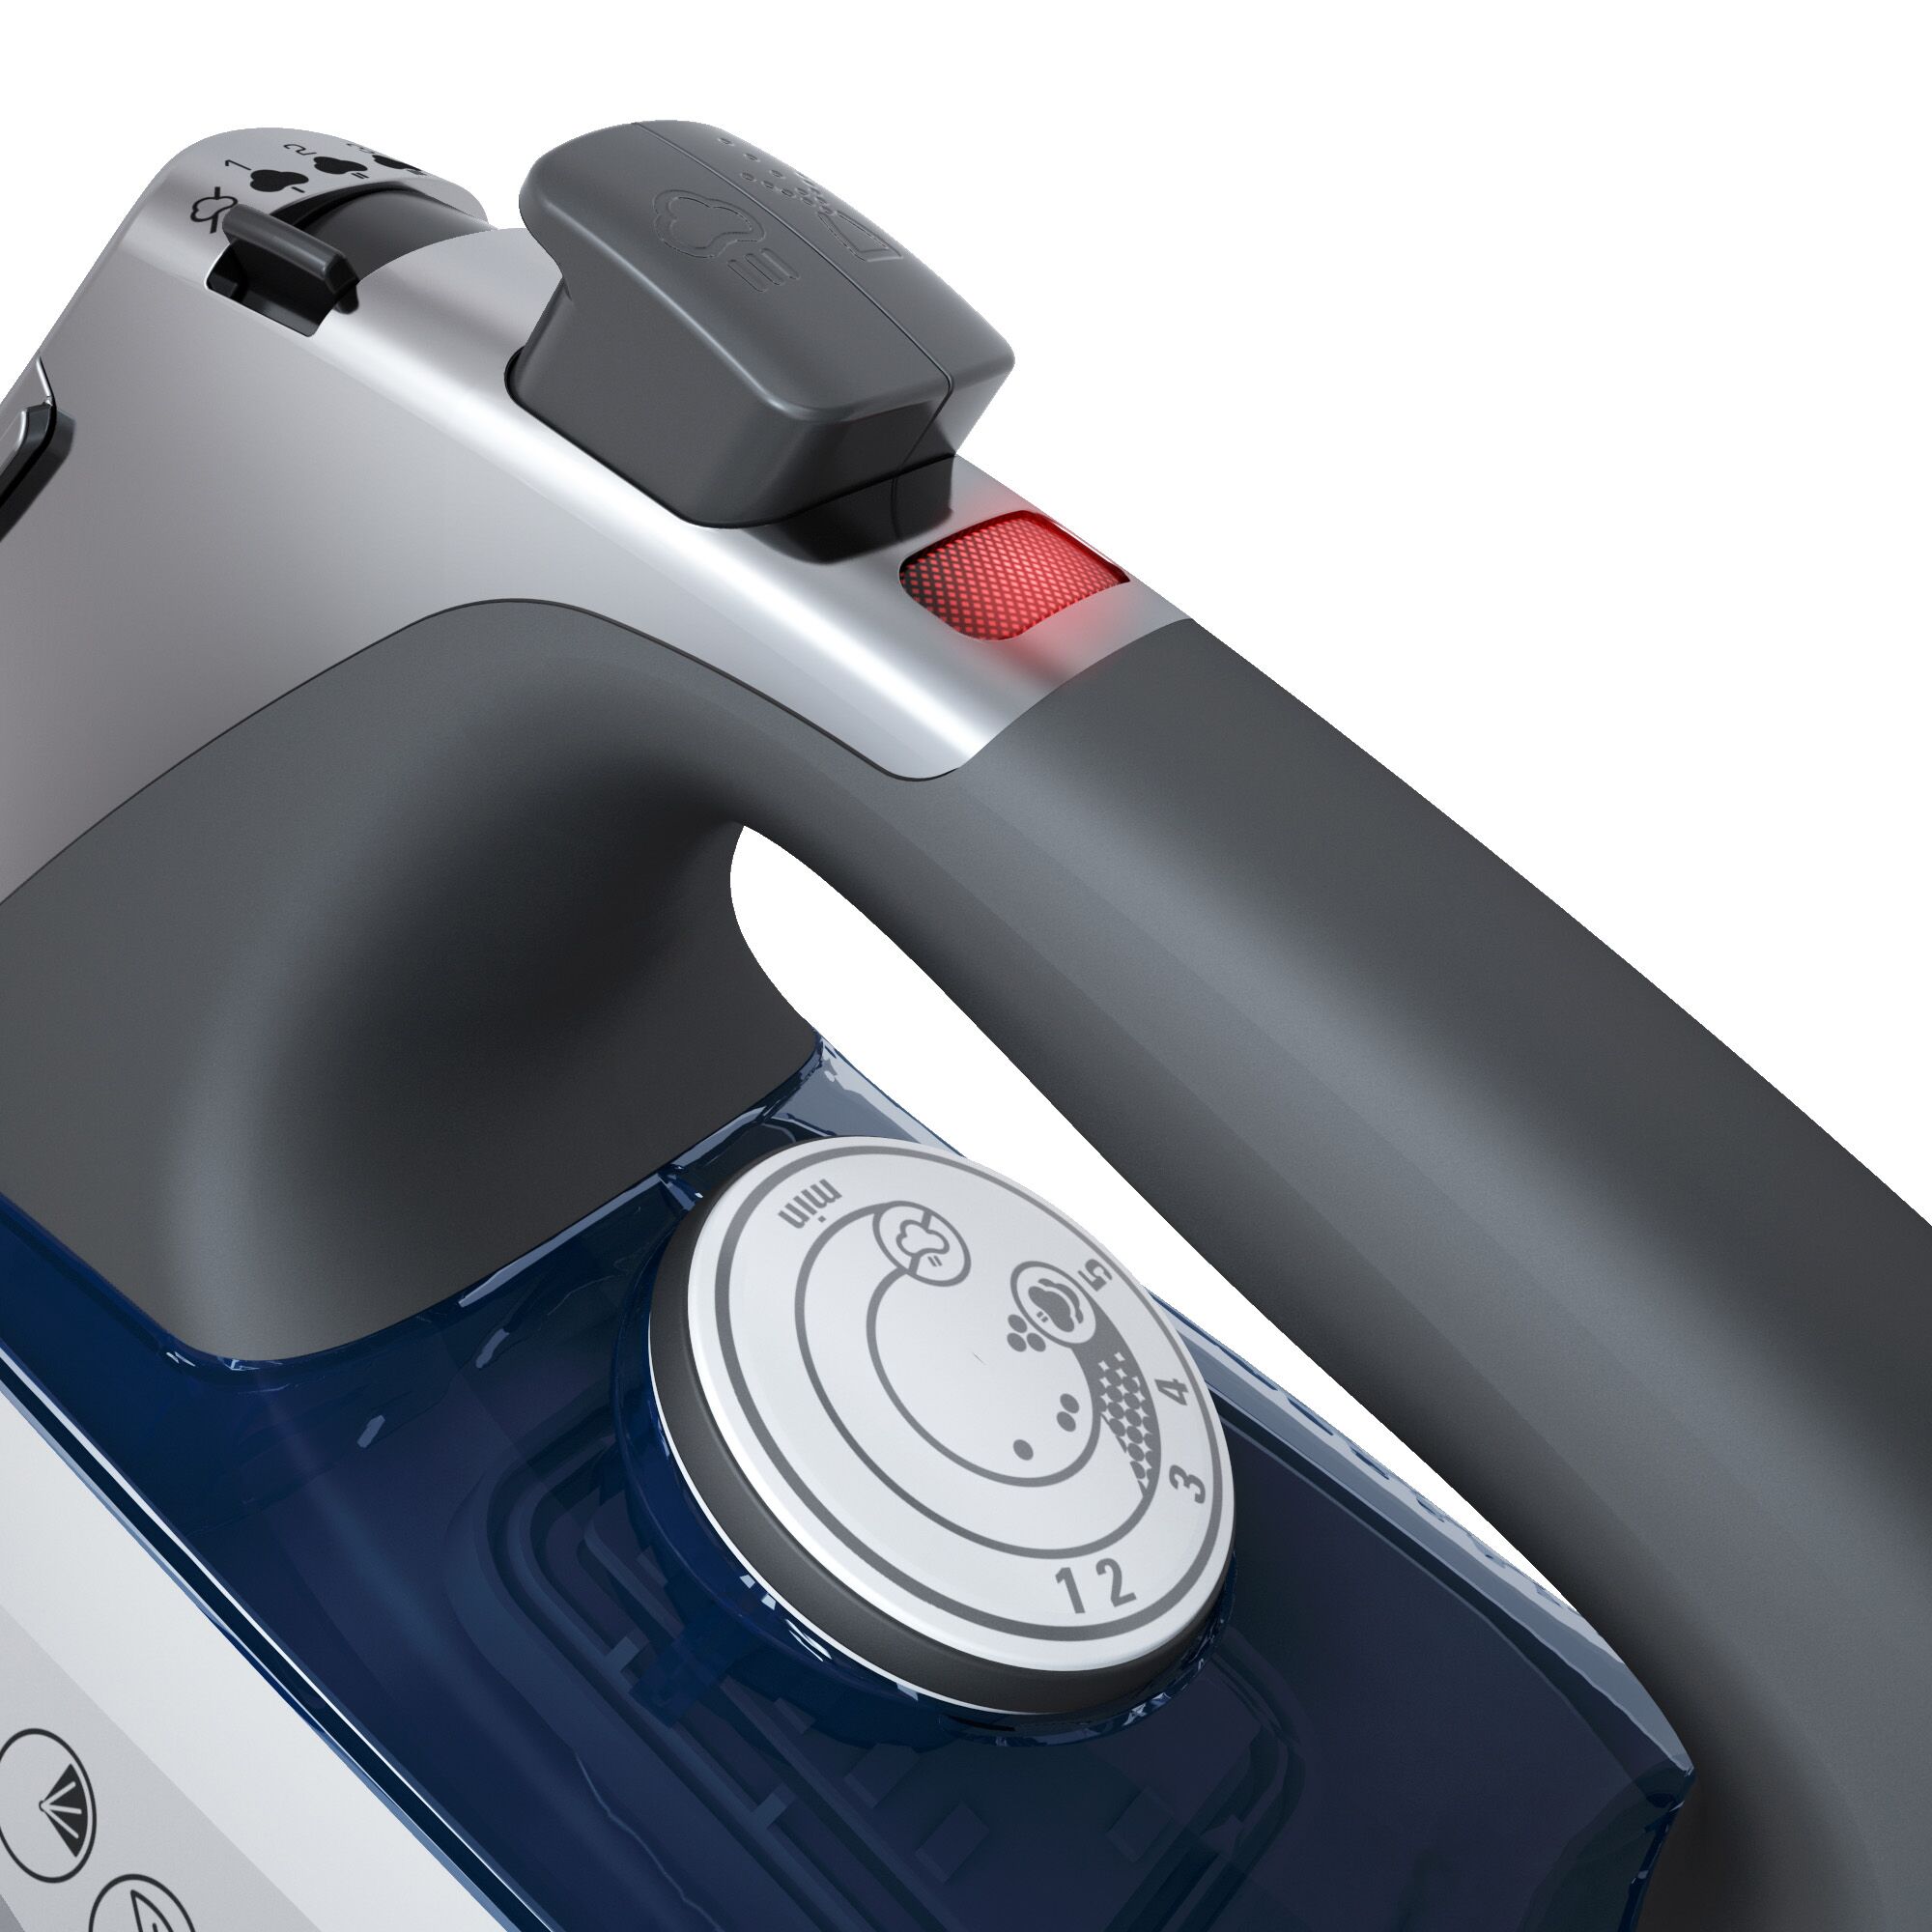 Digital controls for variable temperature feature of Allure Steam Iron.